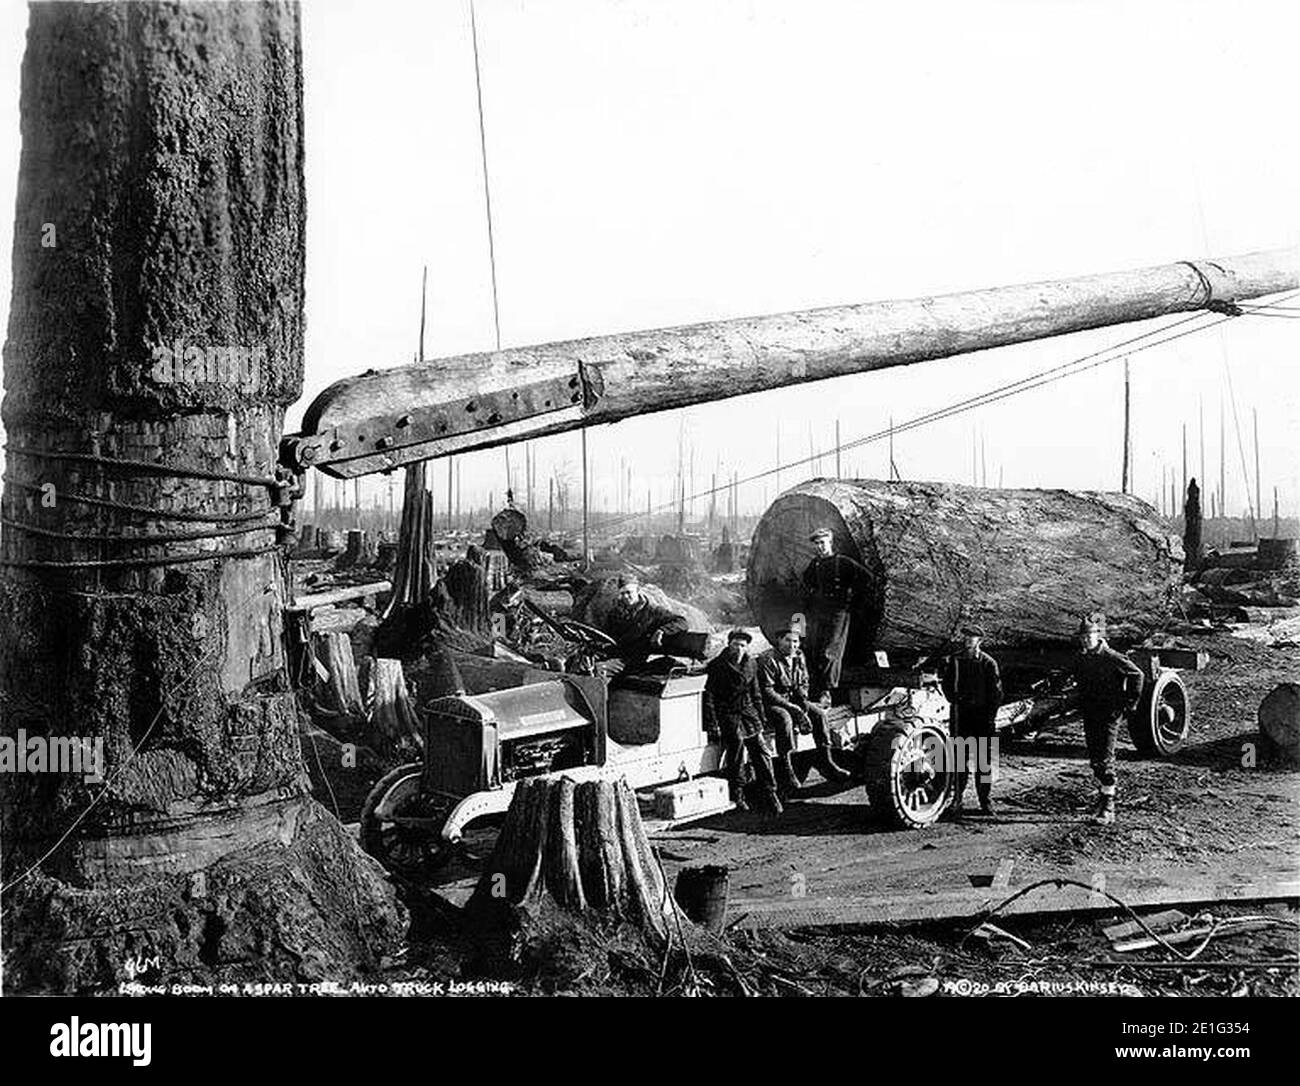 Logging truck and loading boom on a spartree, unidentified logging operation, Washington, 1920 Stock Photo